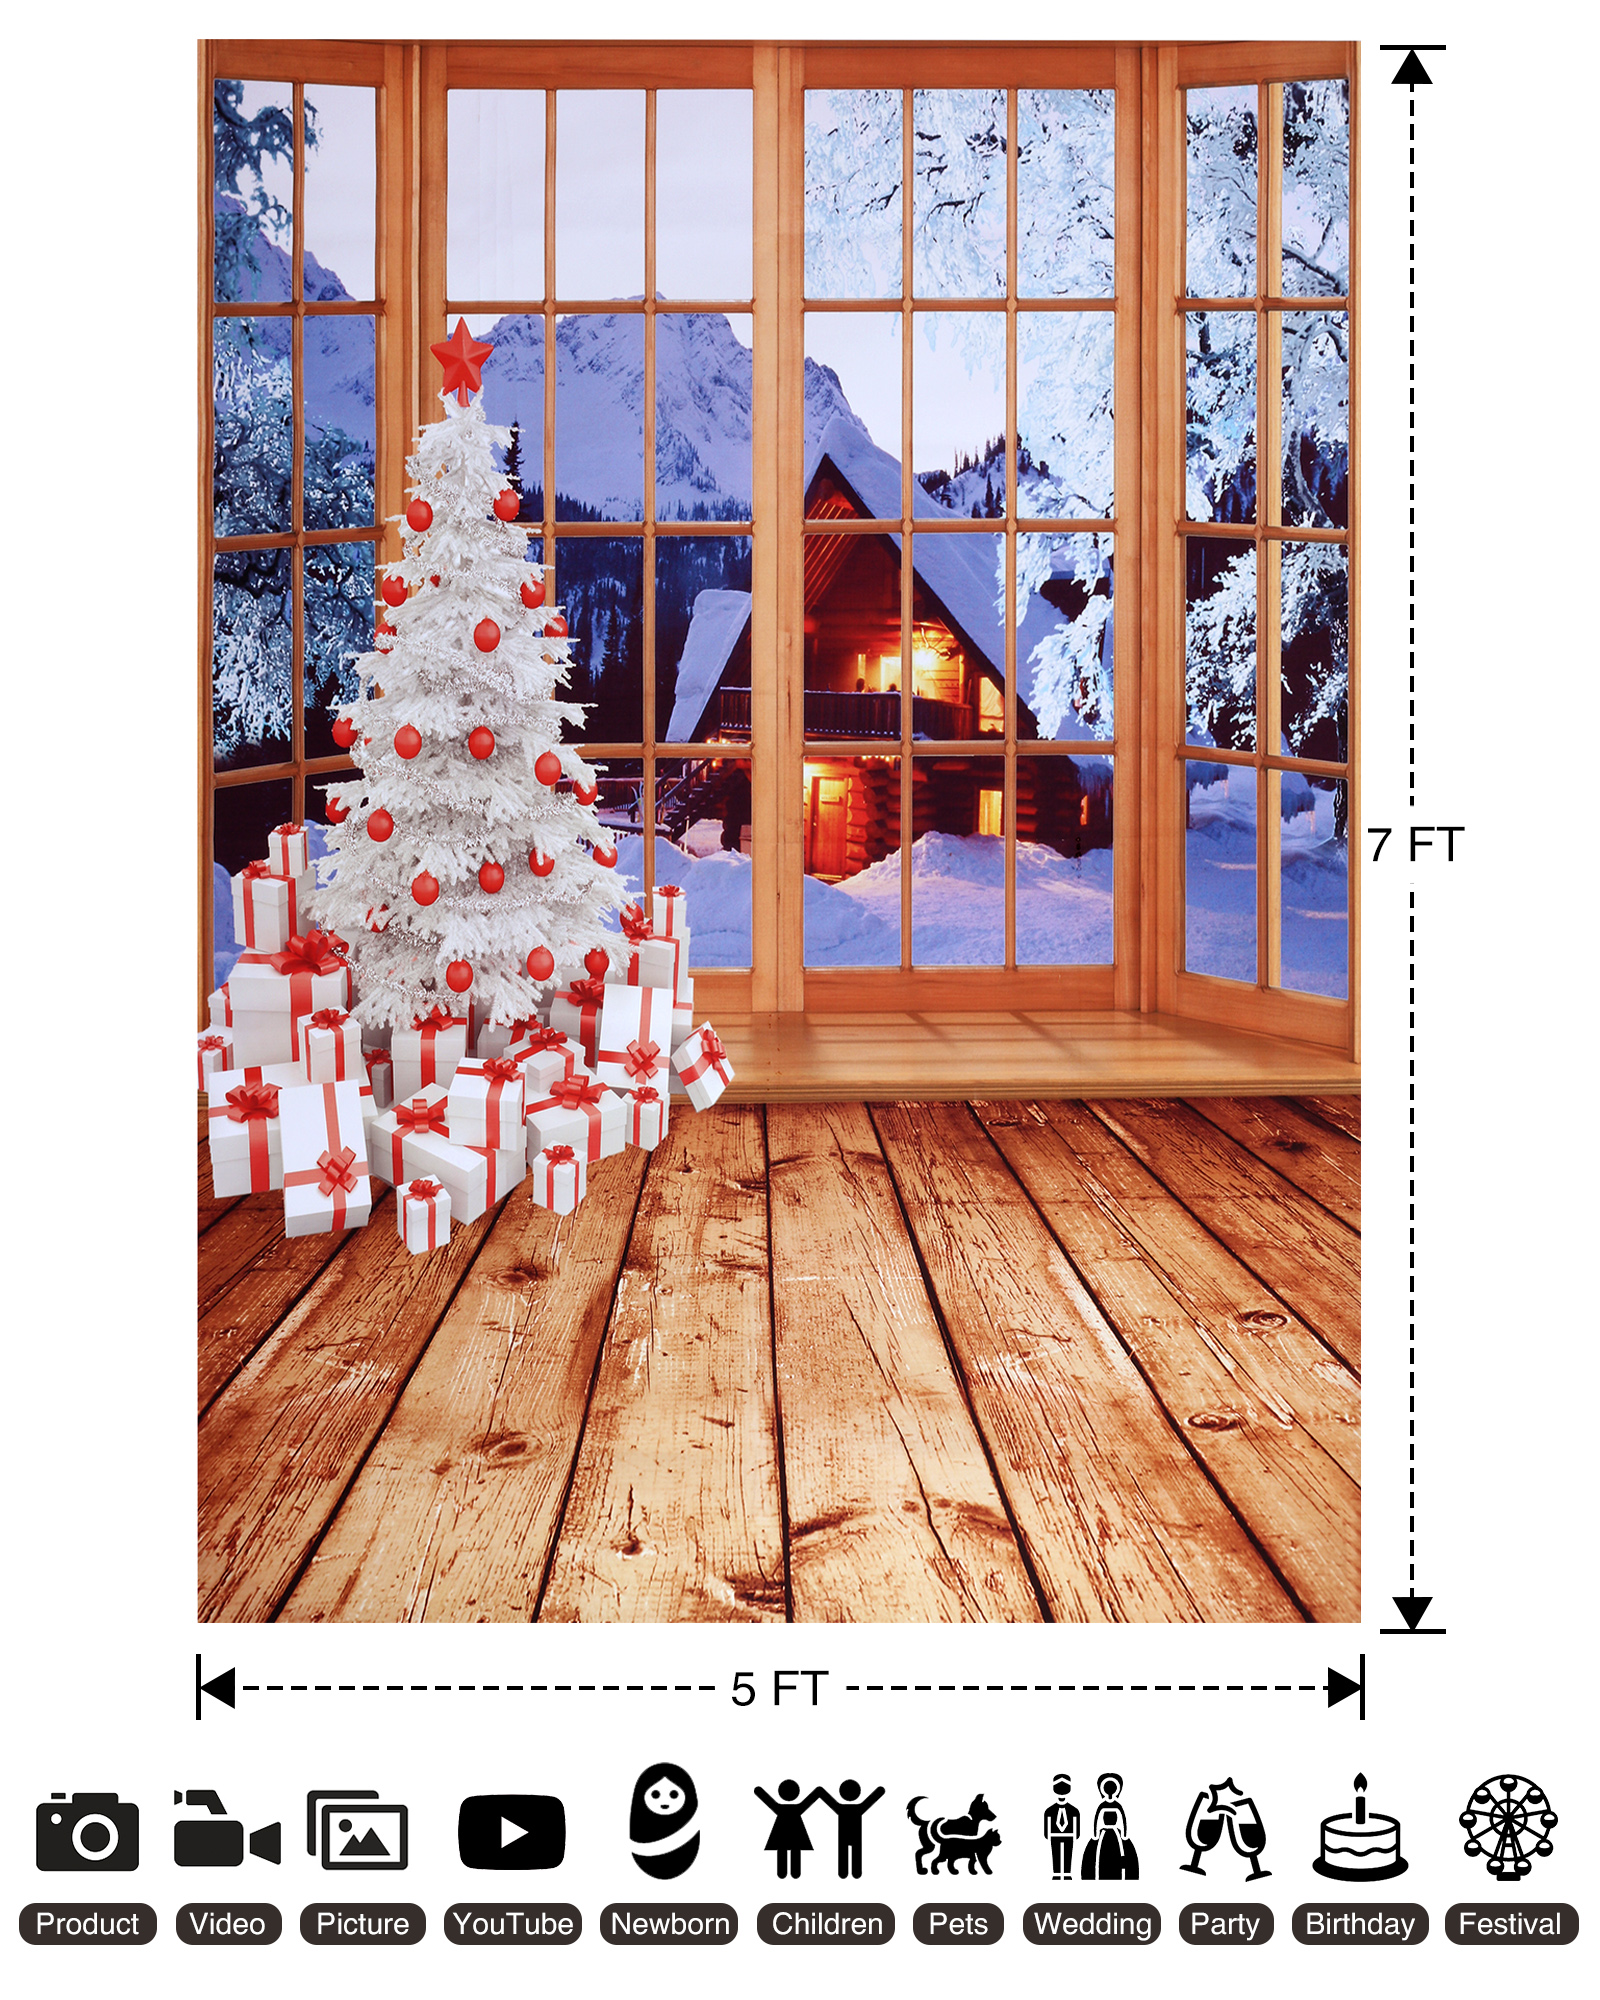 Mohoo-5x7ft-15x21m-Christmas-Backdrop-Photo-Window-Backdrop-with-Wooden-Floor-Christmas-Tree-Snow-Co-1958159-4